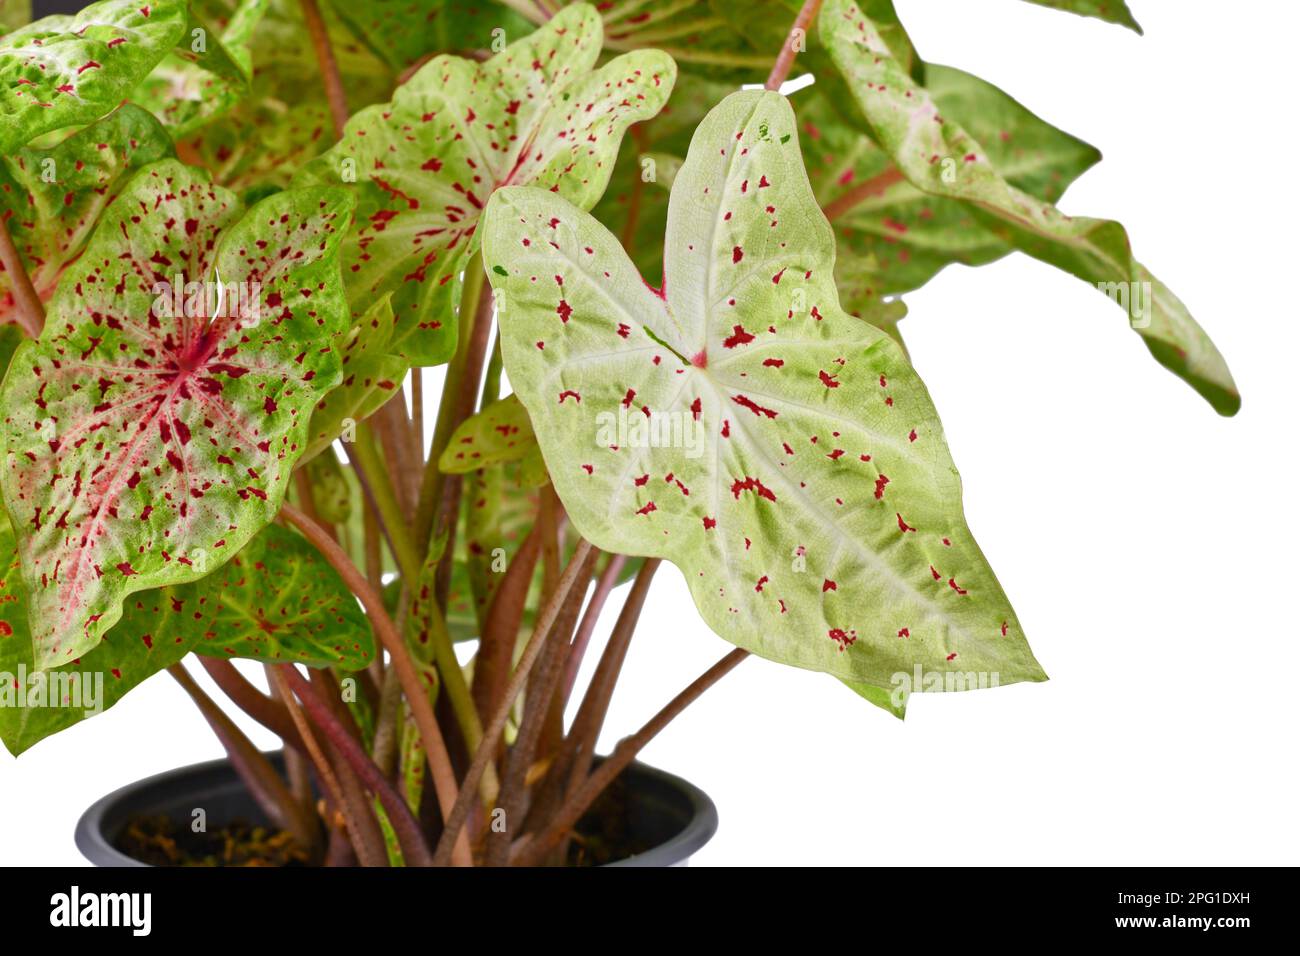 Leaf of exotic 'Caladium Miss Muffet' houseplant with red dots Stock Photo